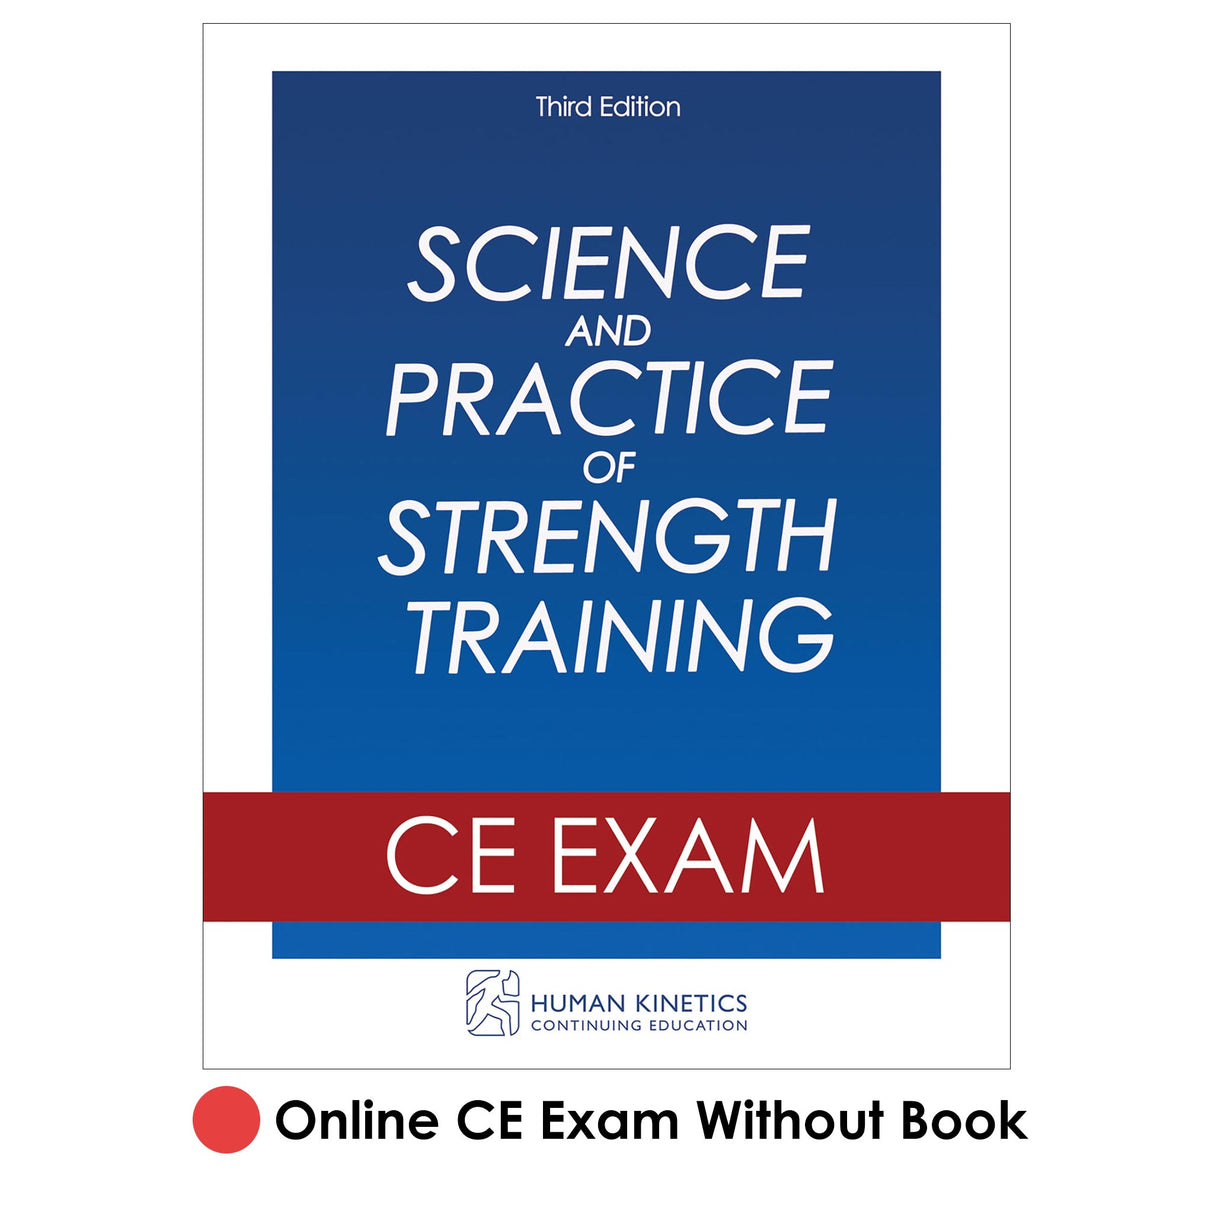 Science and Practice of Strength Training 3rd Edition Online CE Exam Without Book